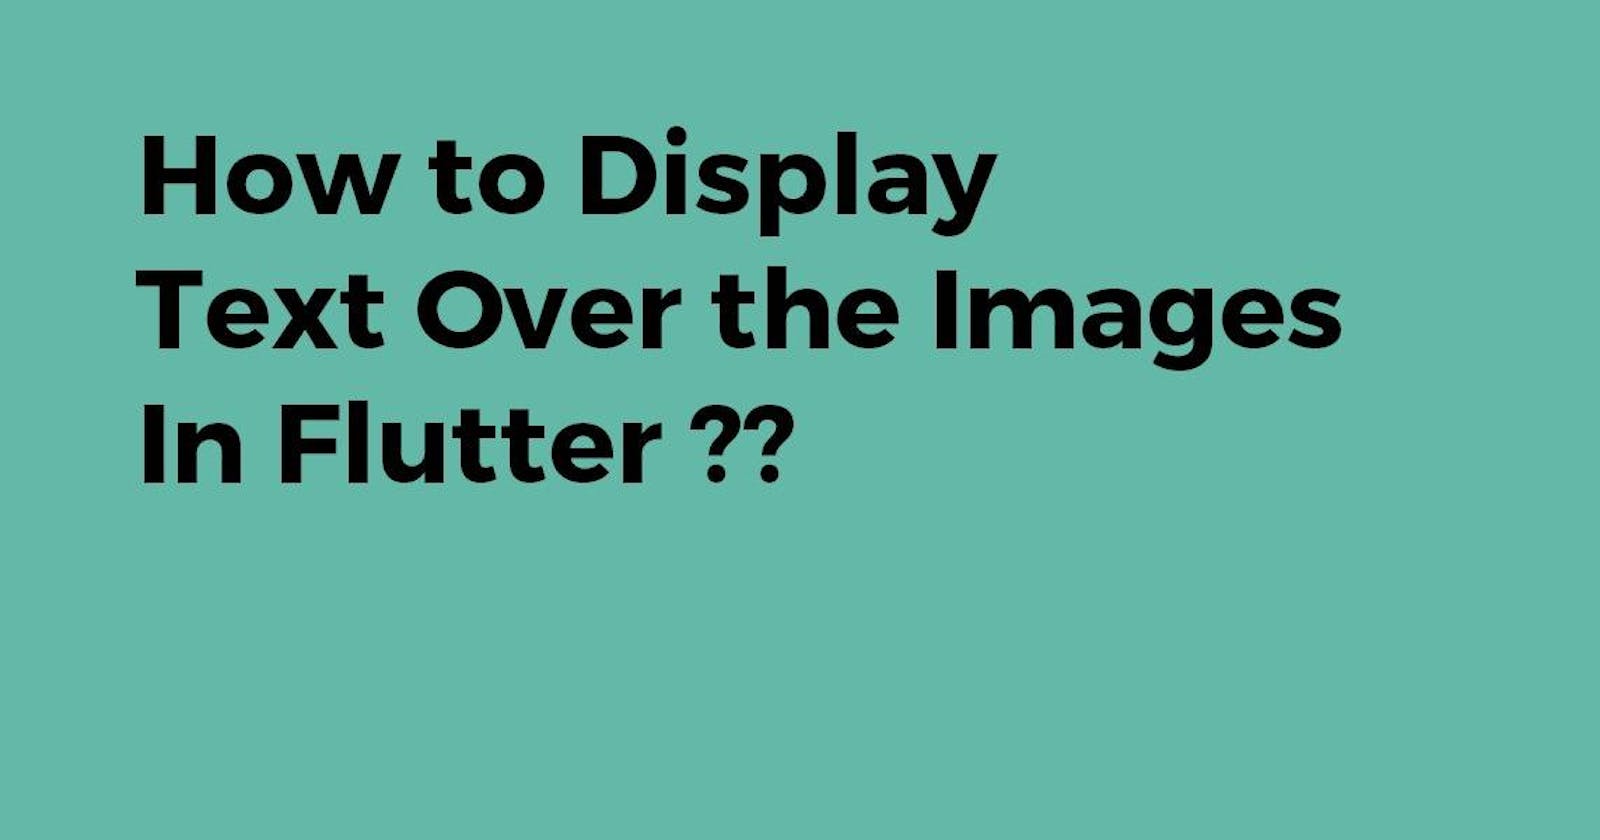 How to display Text Over the Images in Flutter?